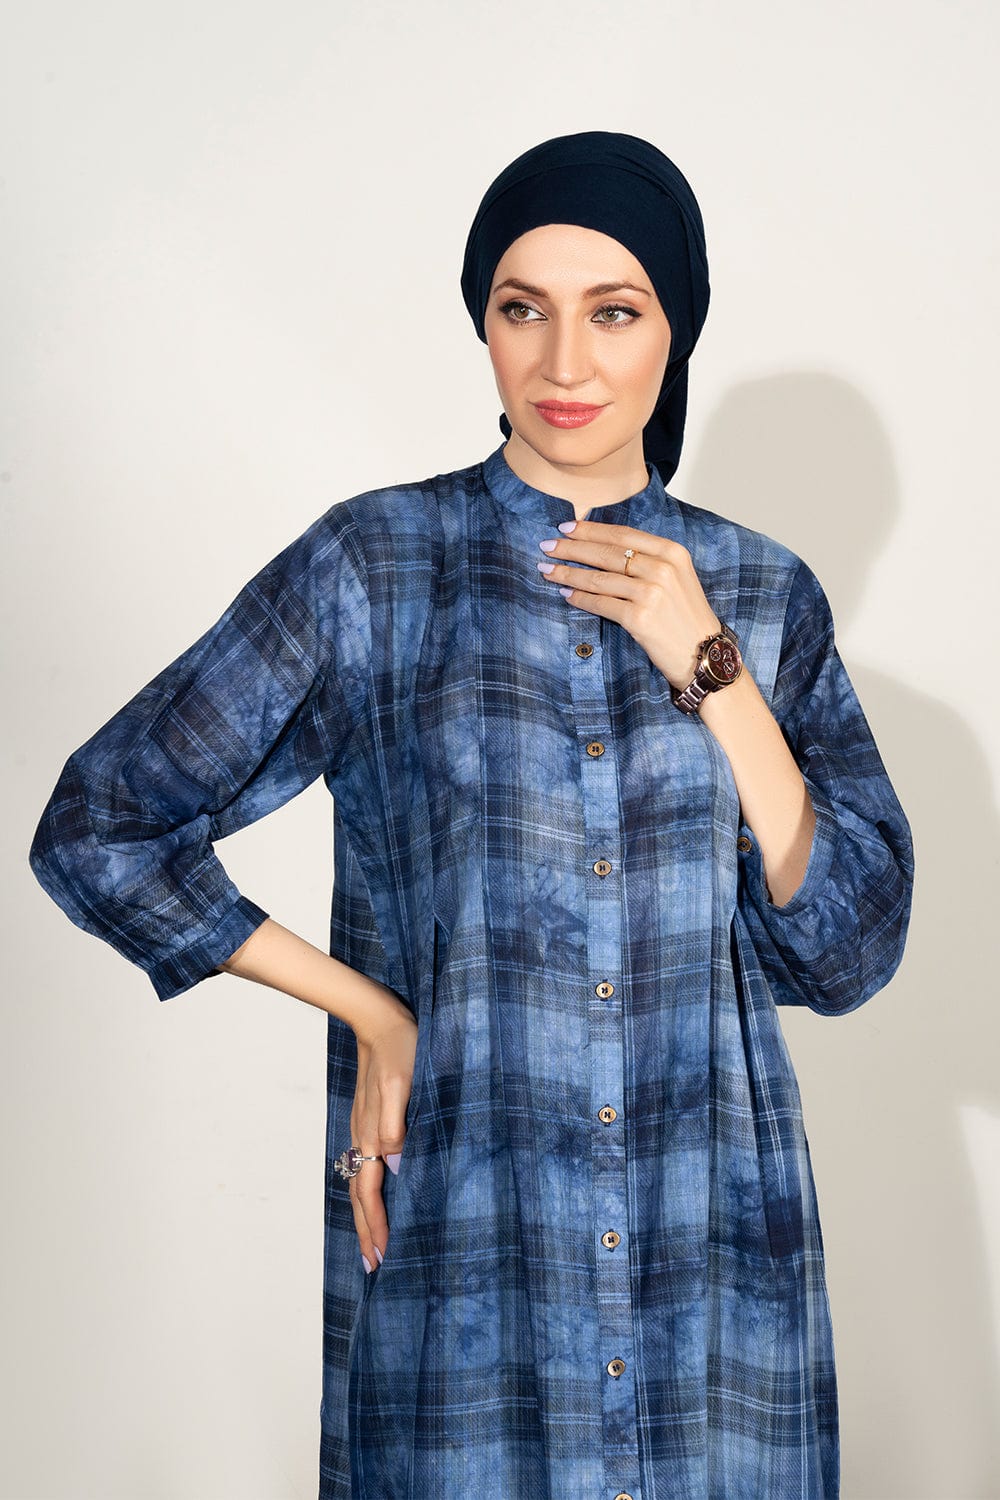 Hope Not Out by Shahid Afridi Eastern Women Shirts Floral Tie Dye Checkered Dress Button Down